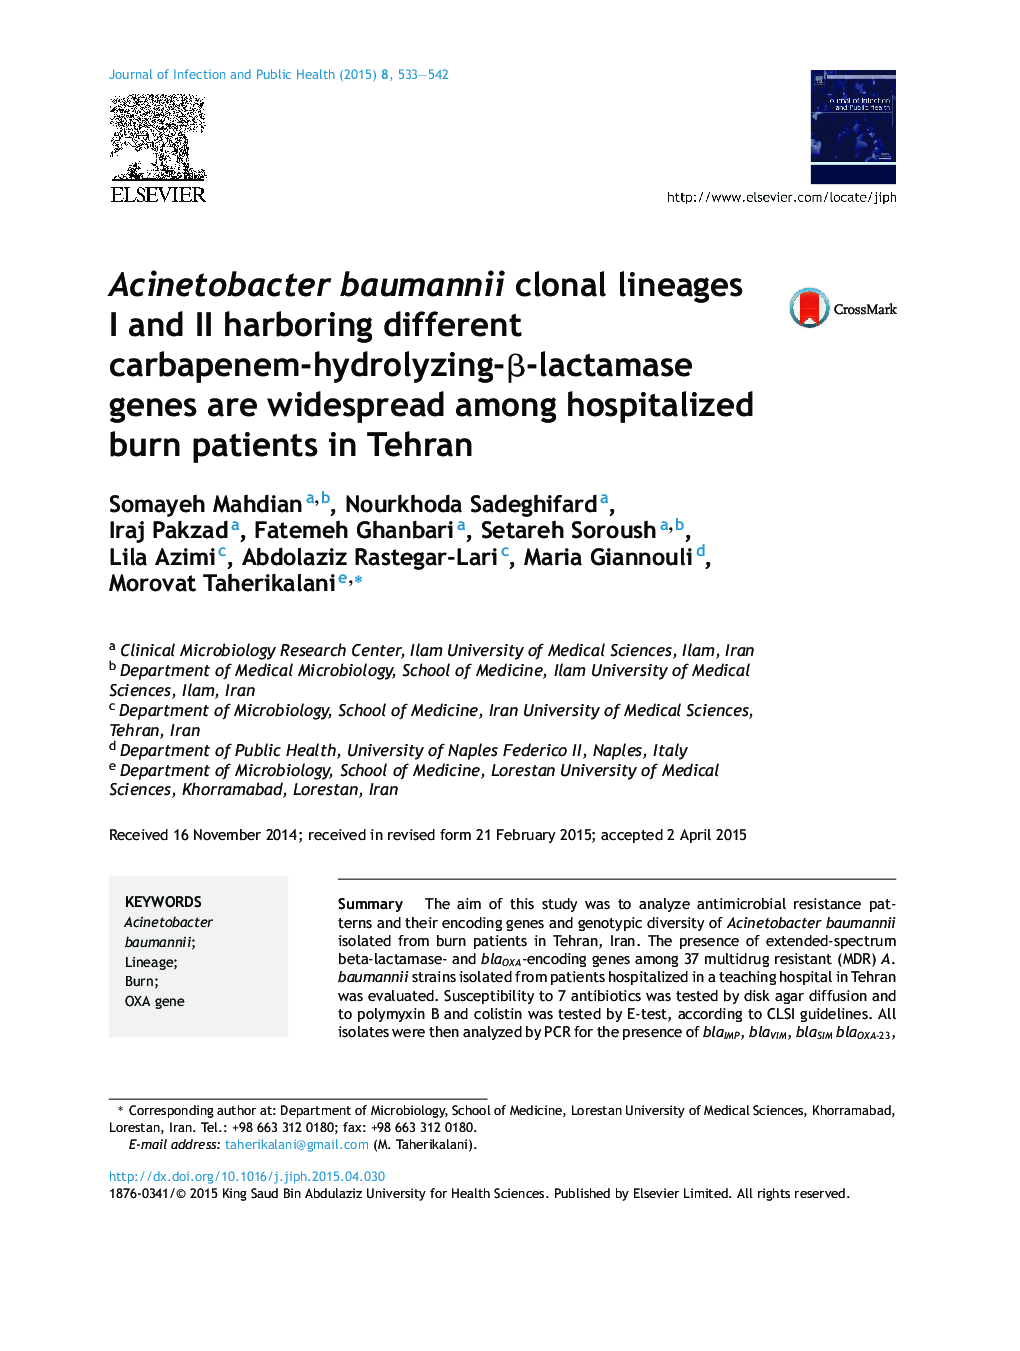 Acinetobacter baumannii clonal lineages I and II harboring different carbapenem-hydrolyzing-β-lactamase genes are widespread among hospitalized burn patients in Tehran